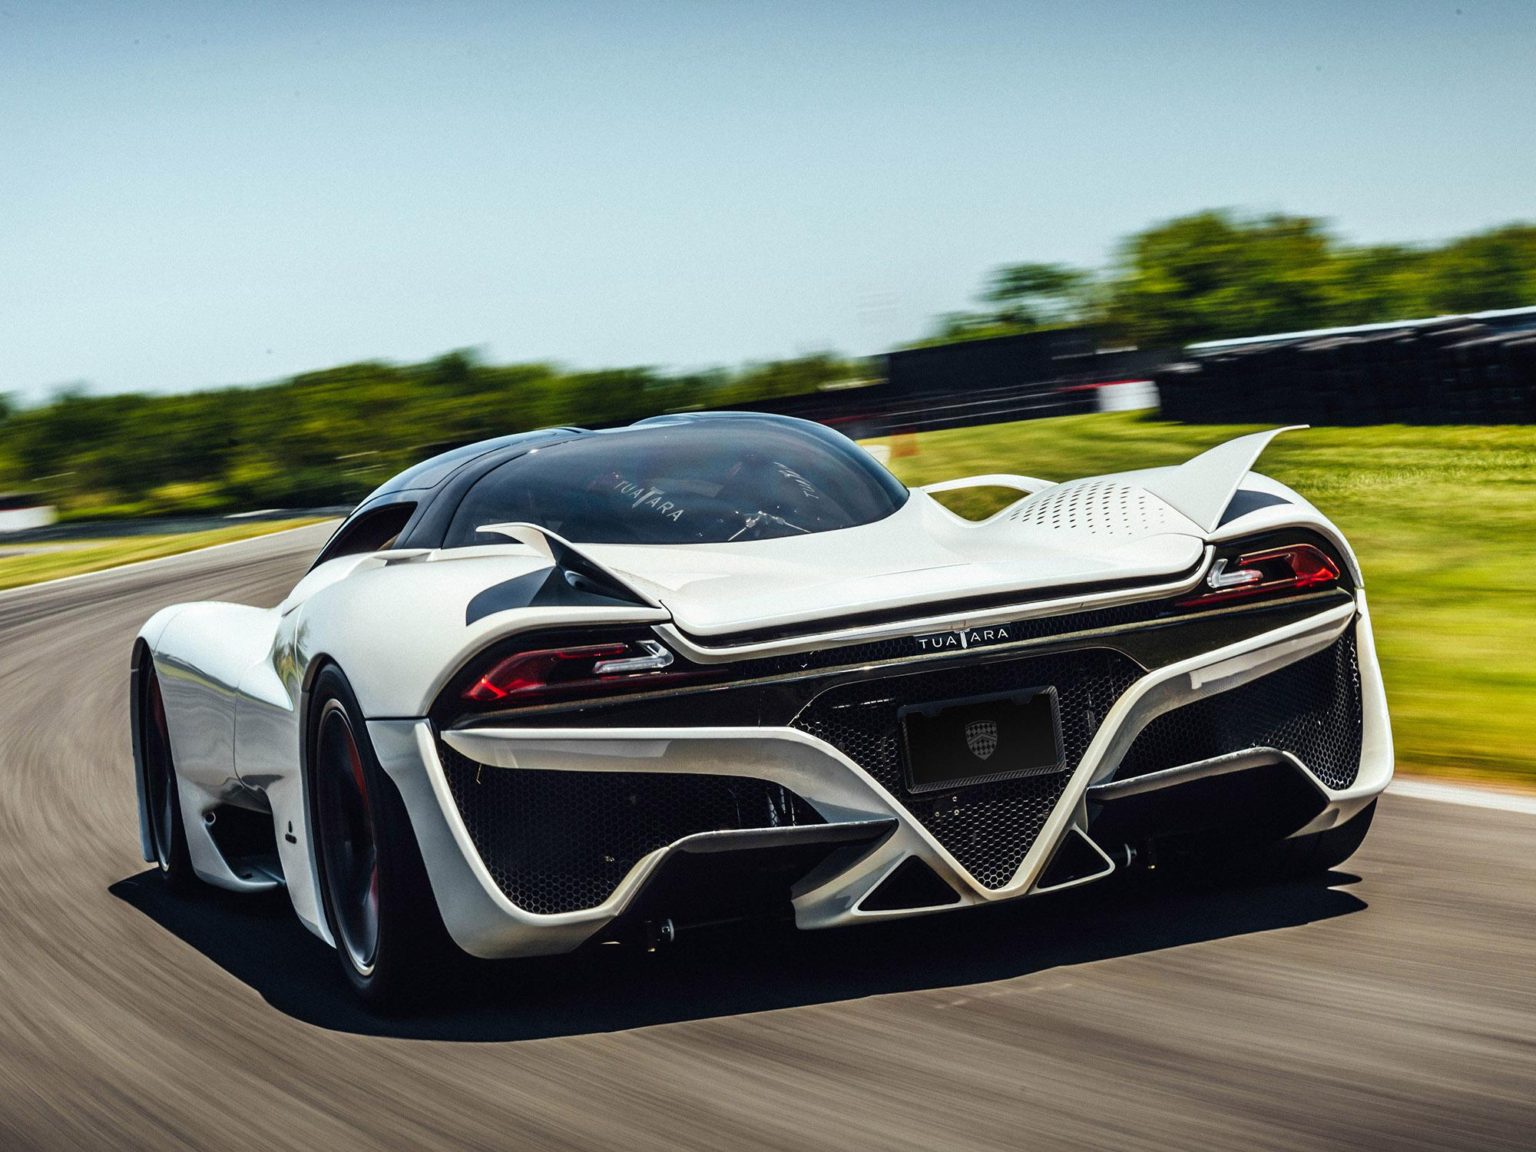 The SSC Tuatara is one of the quickest cars in the world.